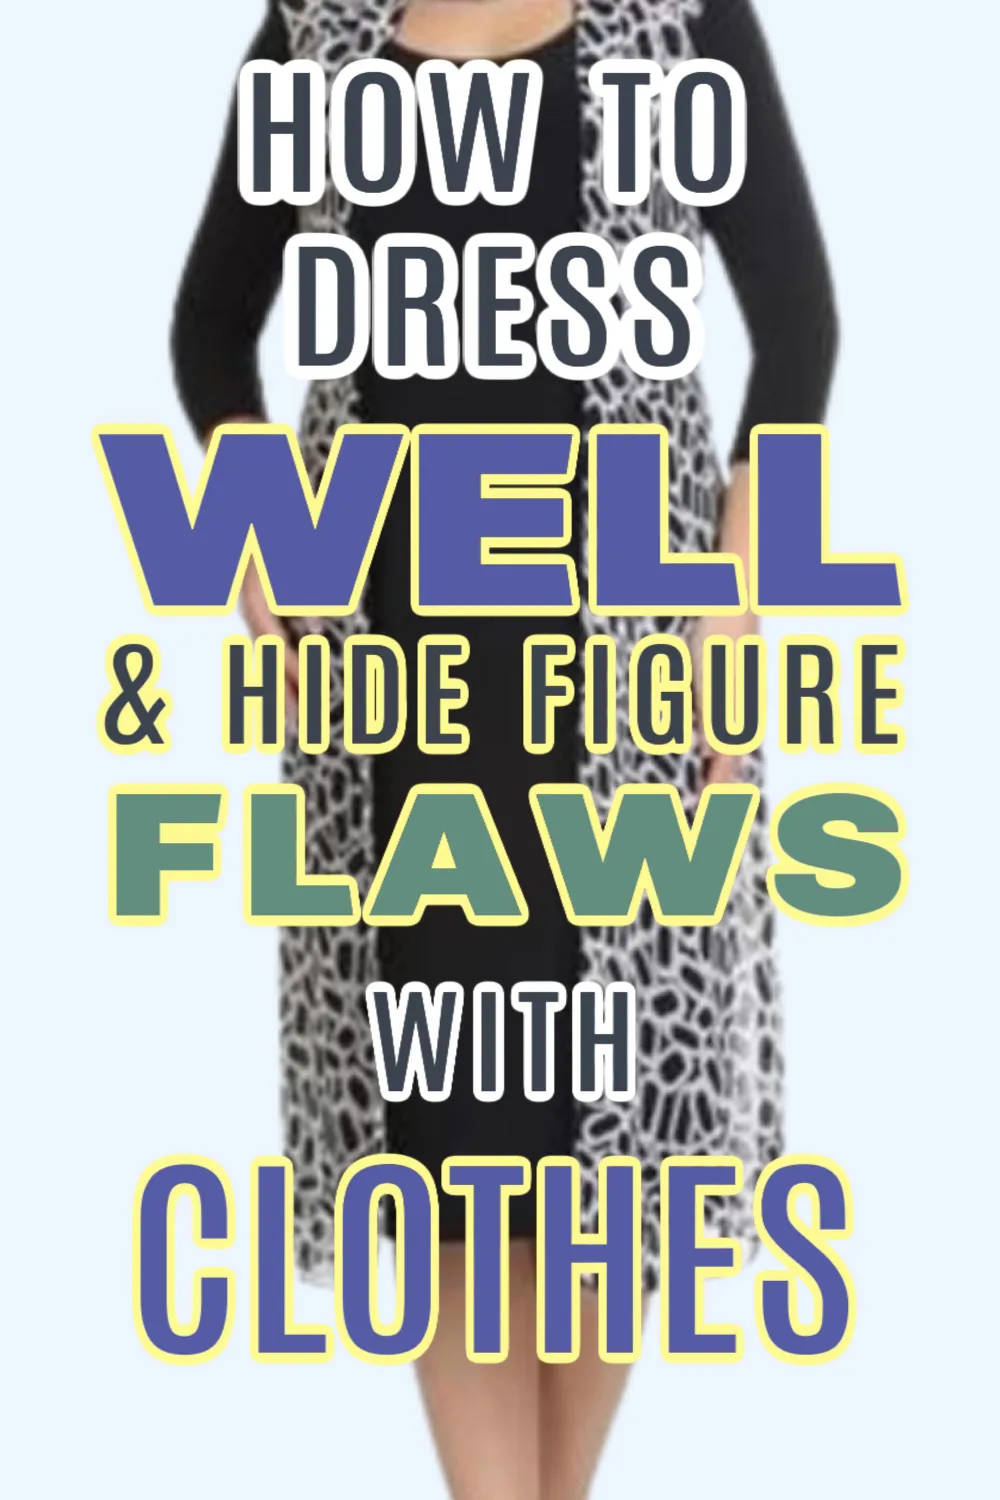 How to dress well and hide figure flaws with clothes